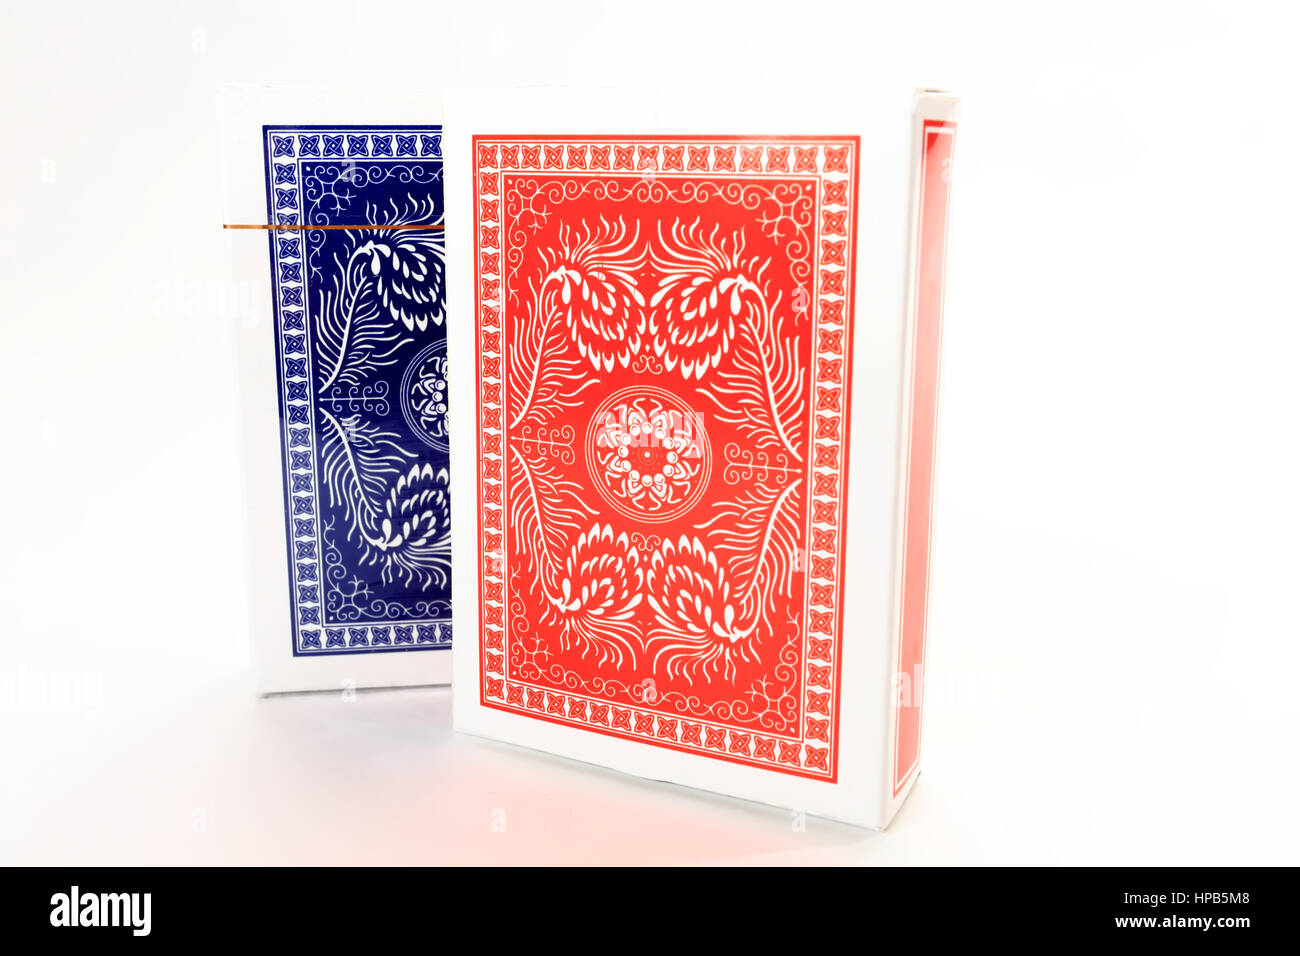 Red and blue card decks isolated on white background. Poker cards close up. Stock Photo